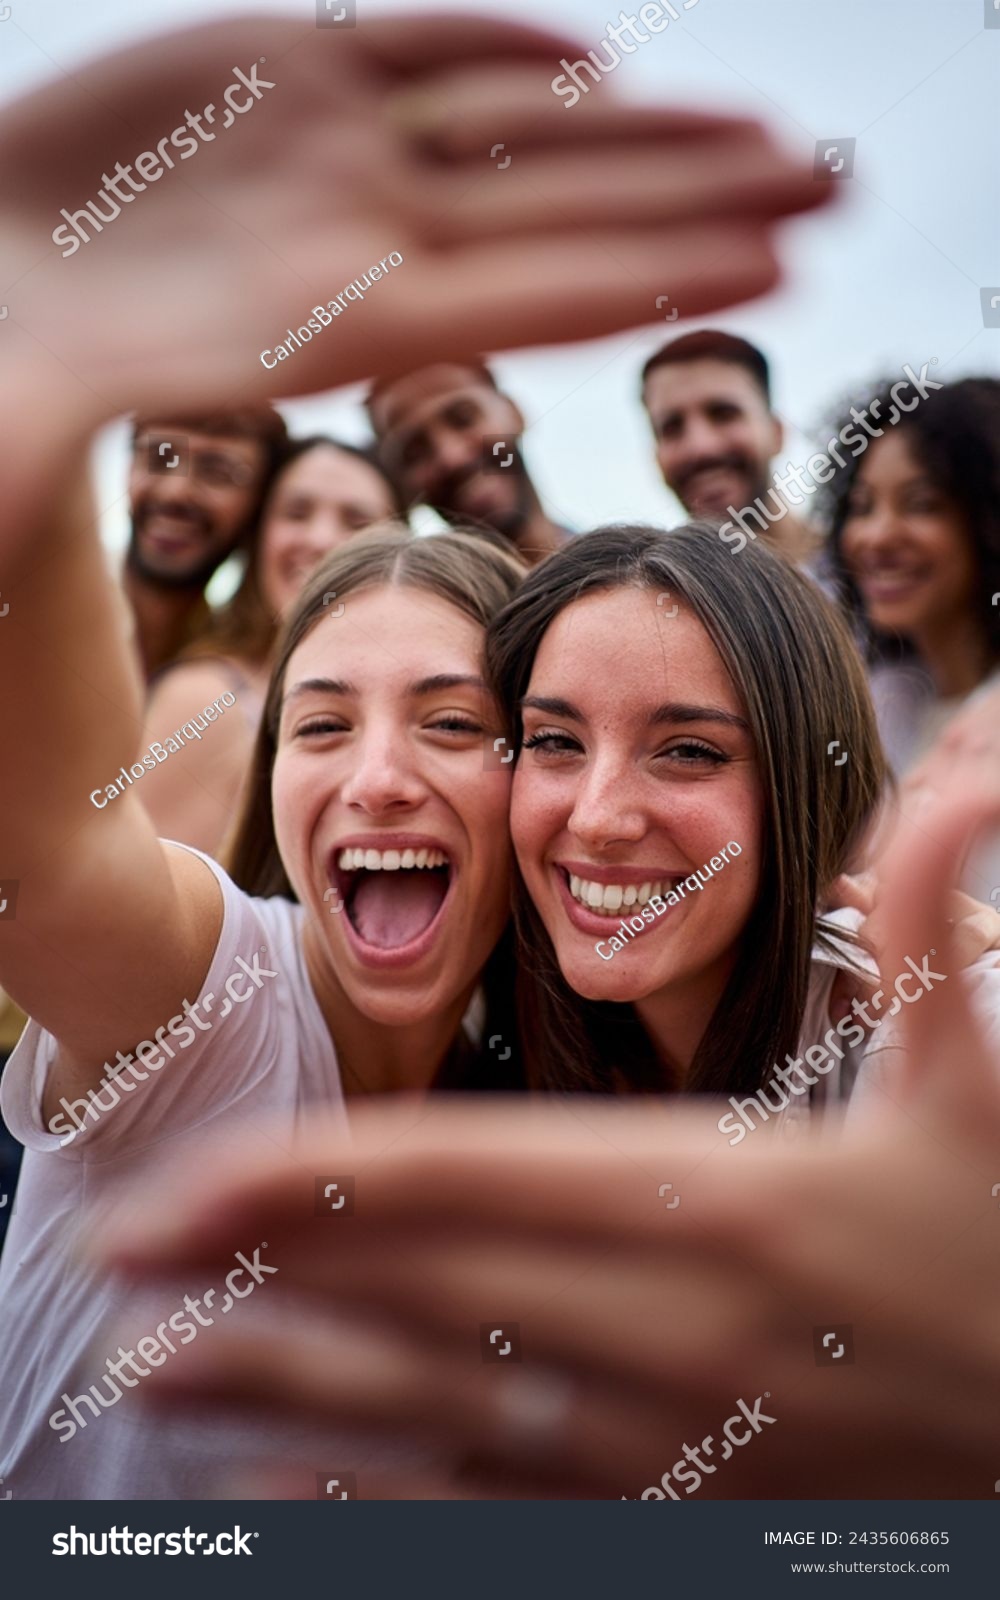 Vertical photo. Two girl friends making a frame with hands. A group of young people is happily celebrating, taking a selfie together. Smiling women having fun during their leisure travel #2435606865